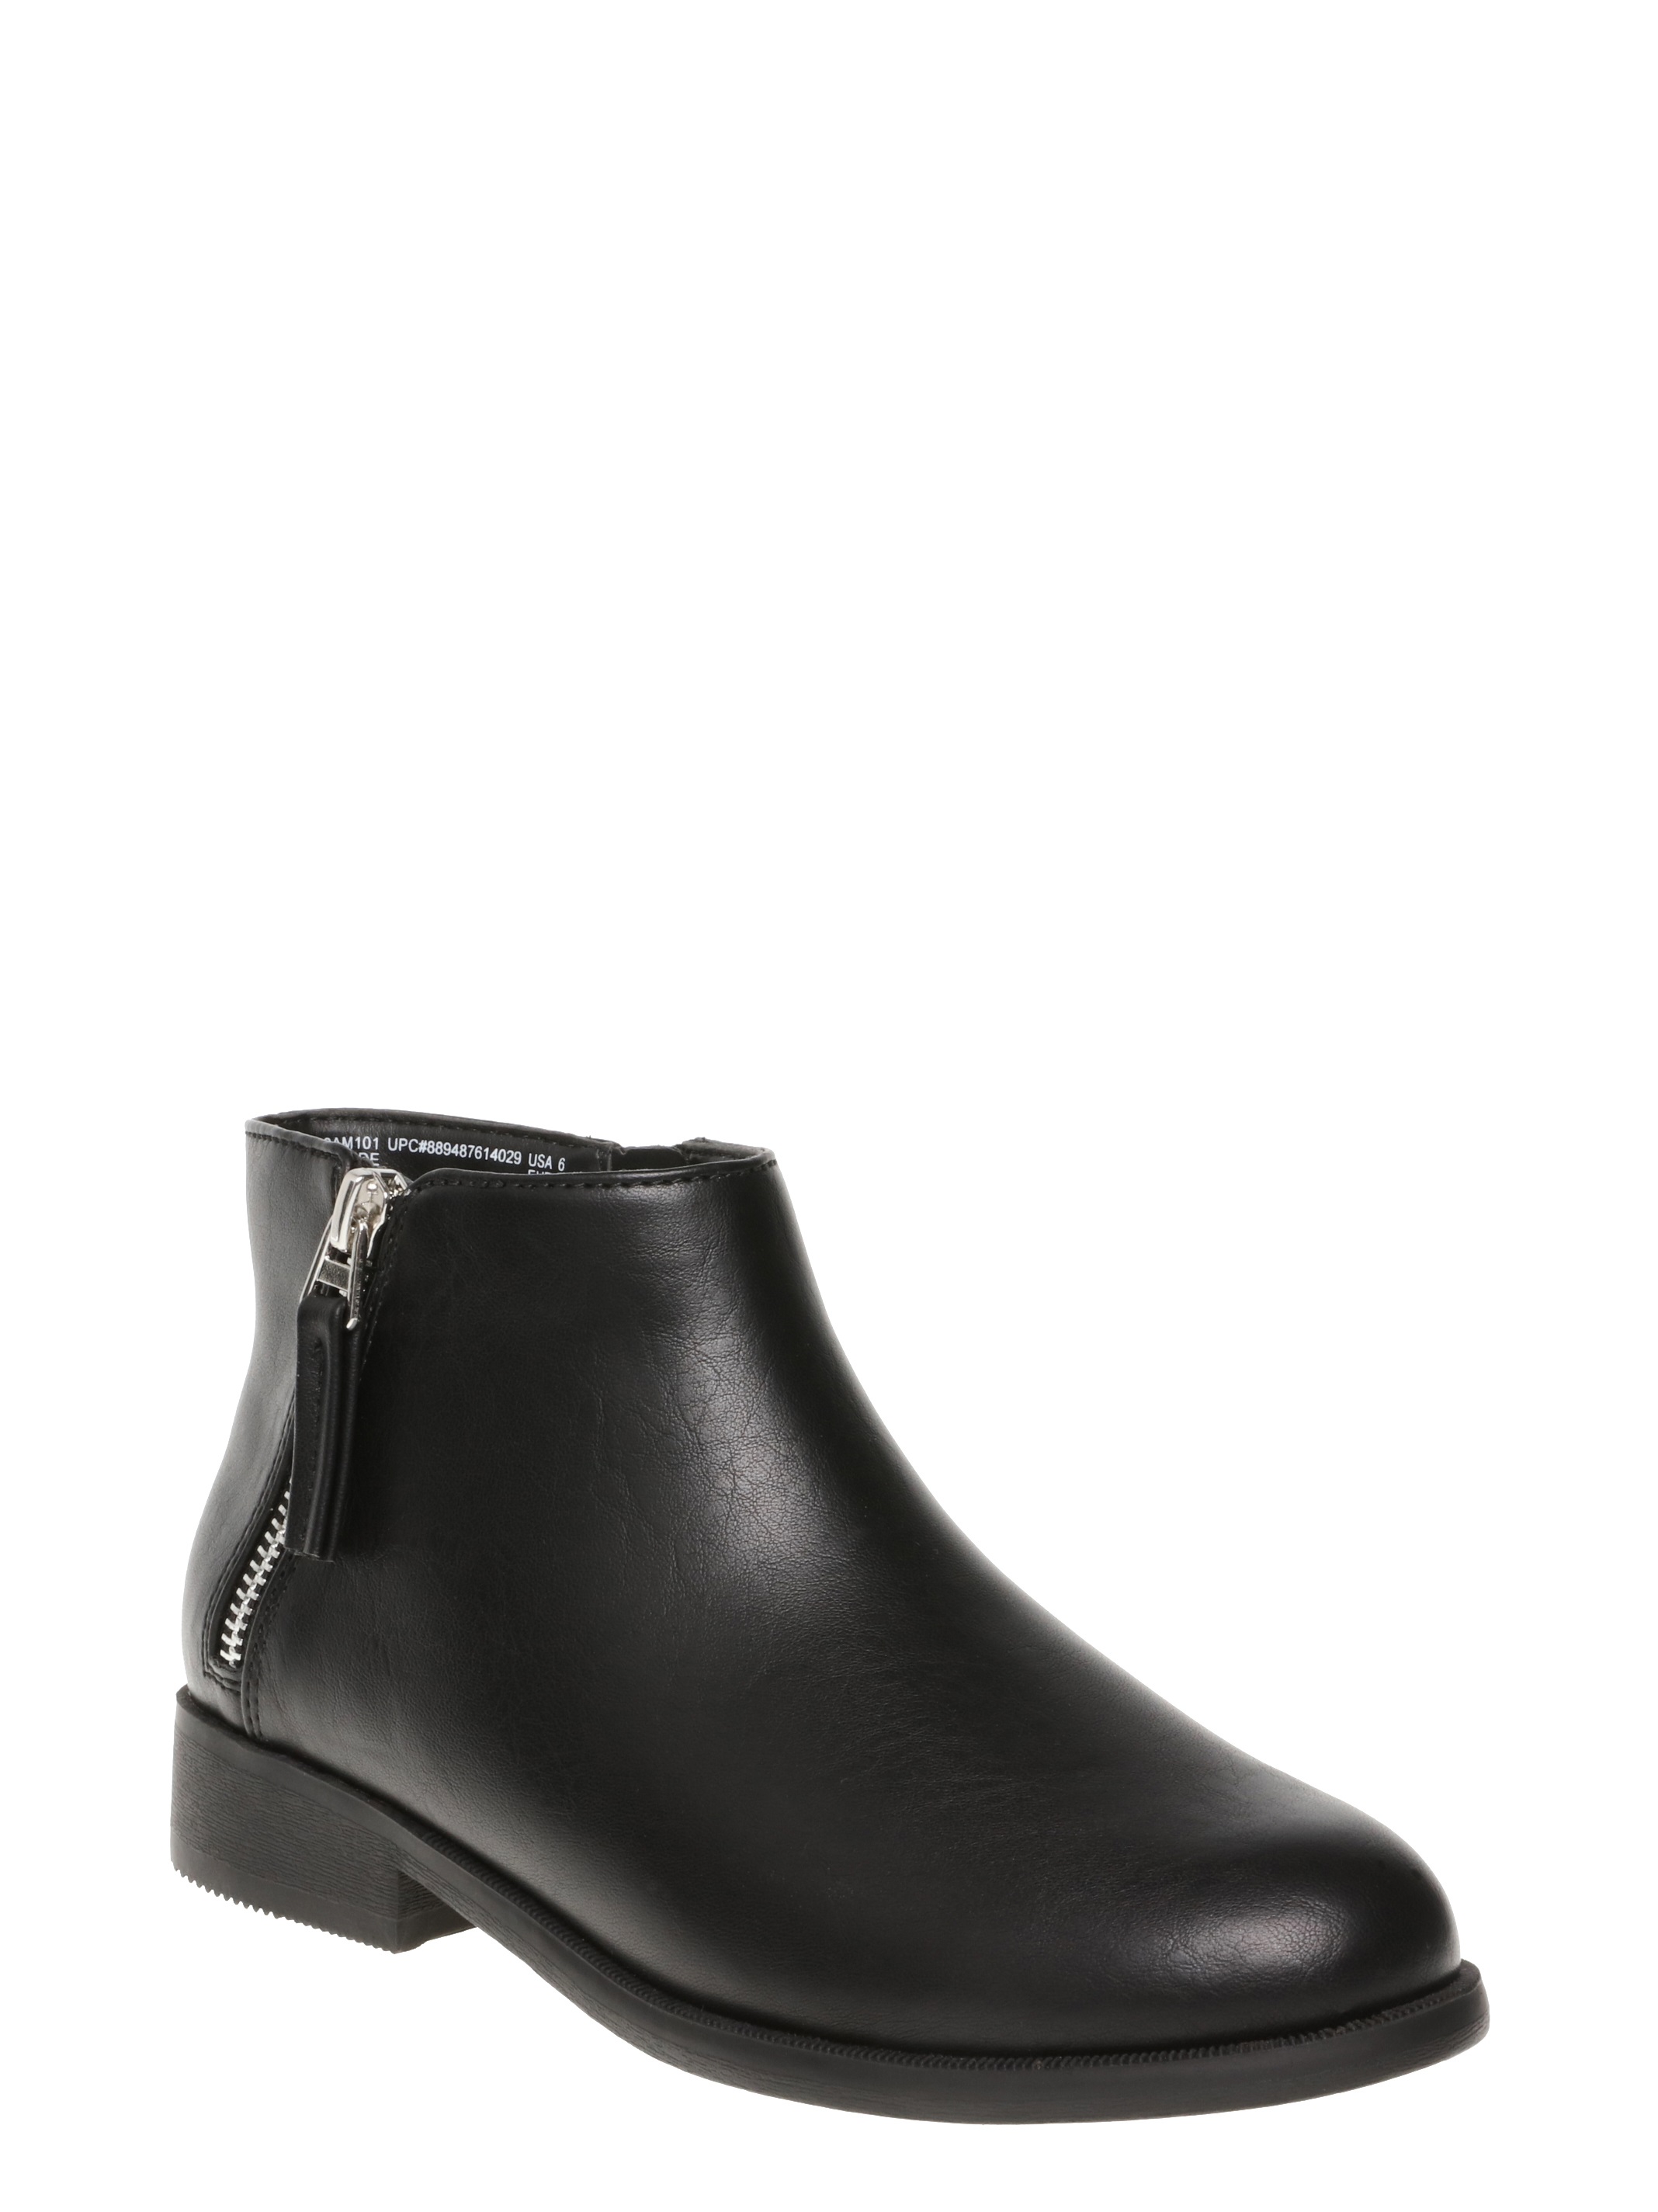 Women's Time and Tru Two Zip Bootie - image 1 of 6